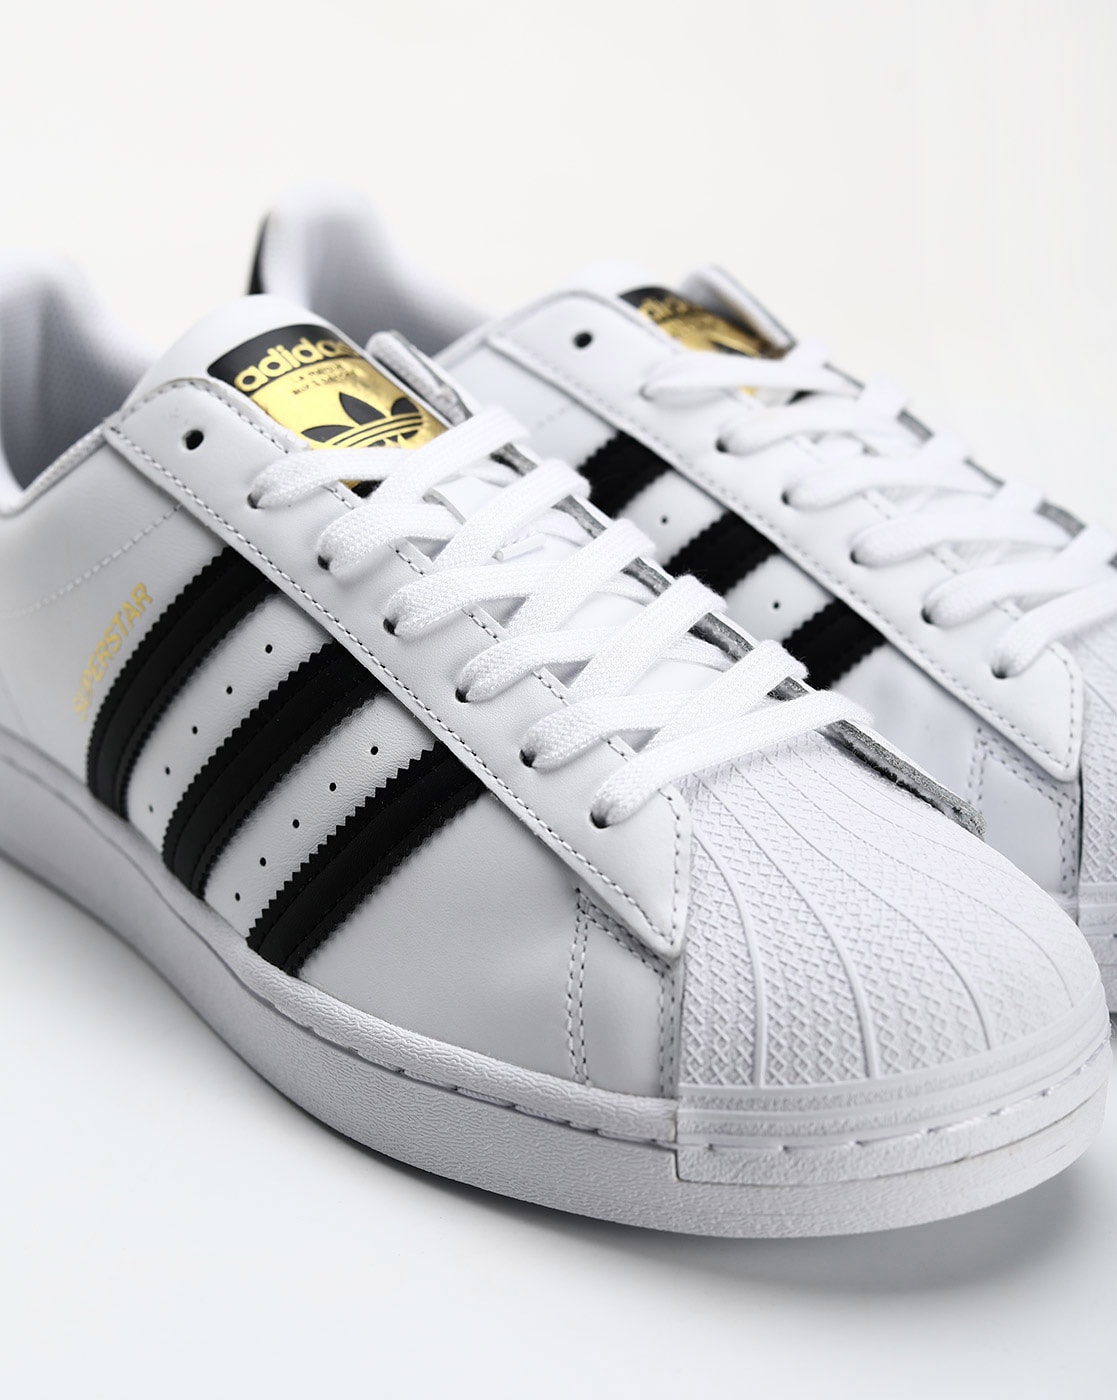 Adidas Originals Sneakers White | vlr.eng.br